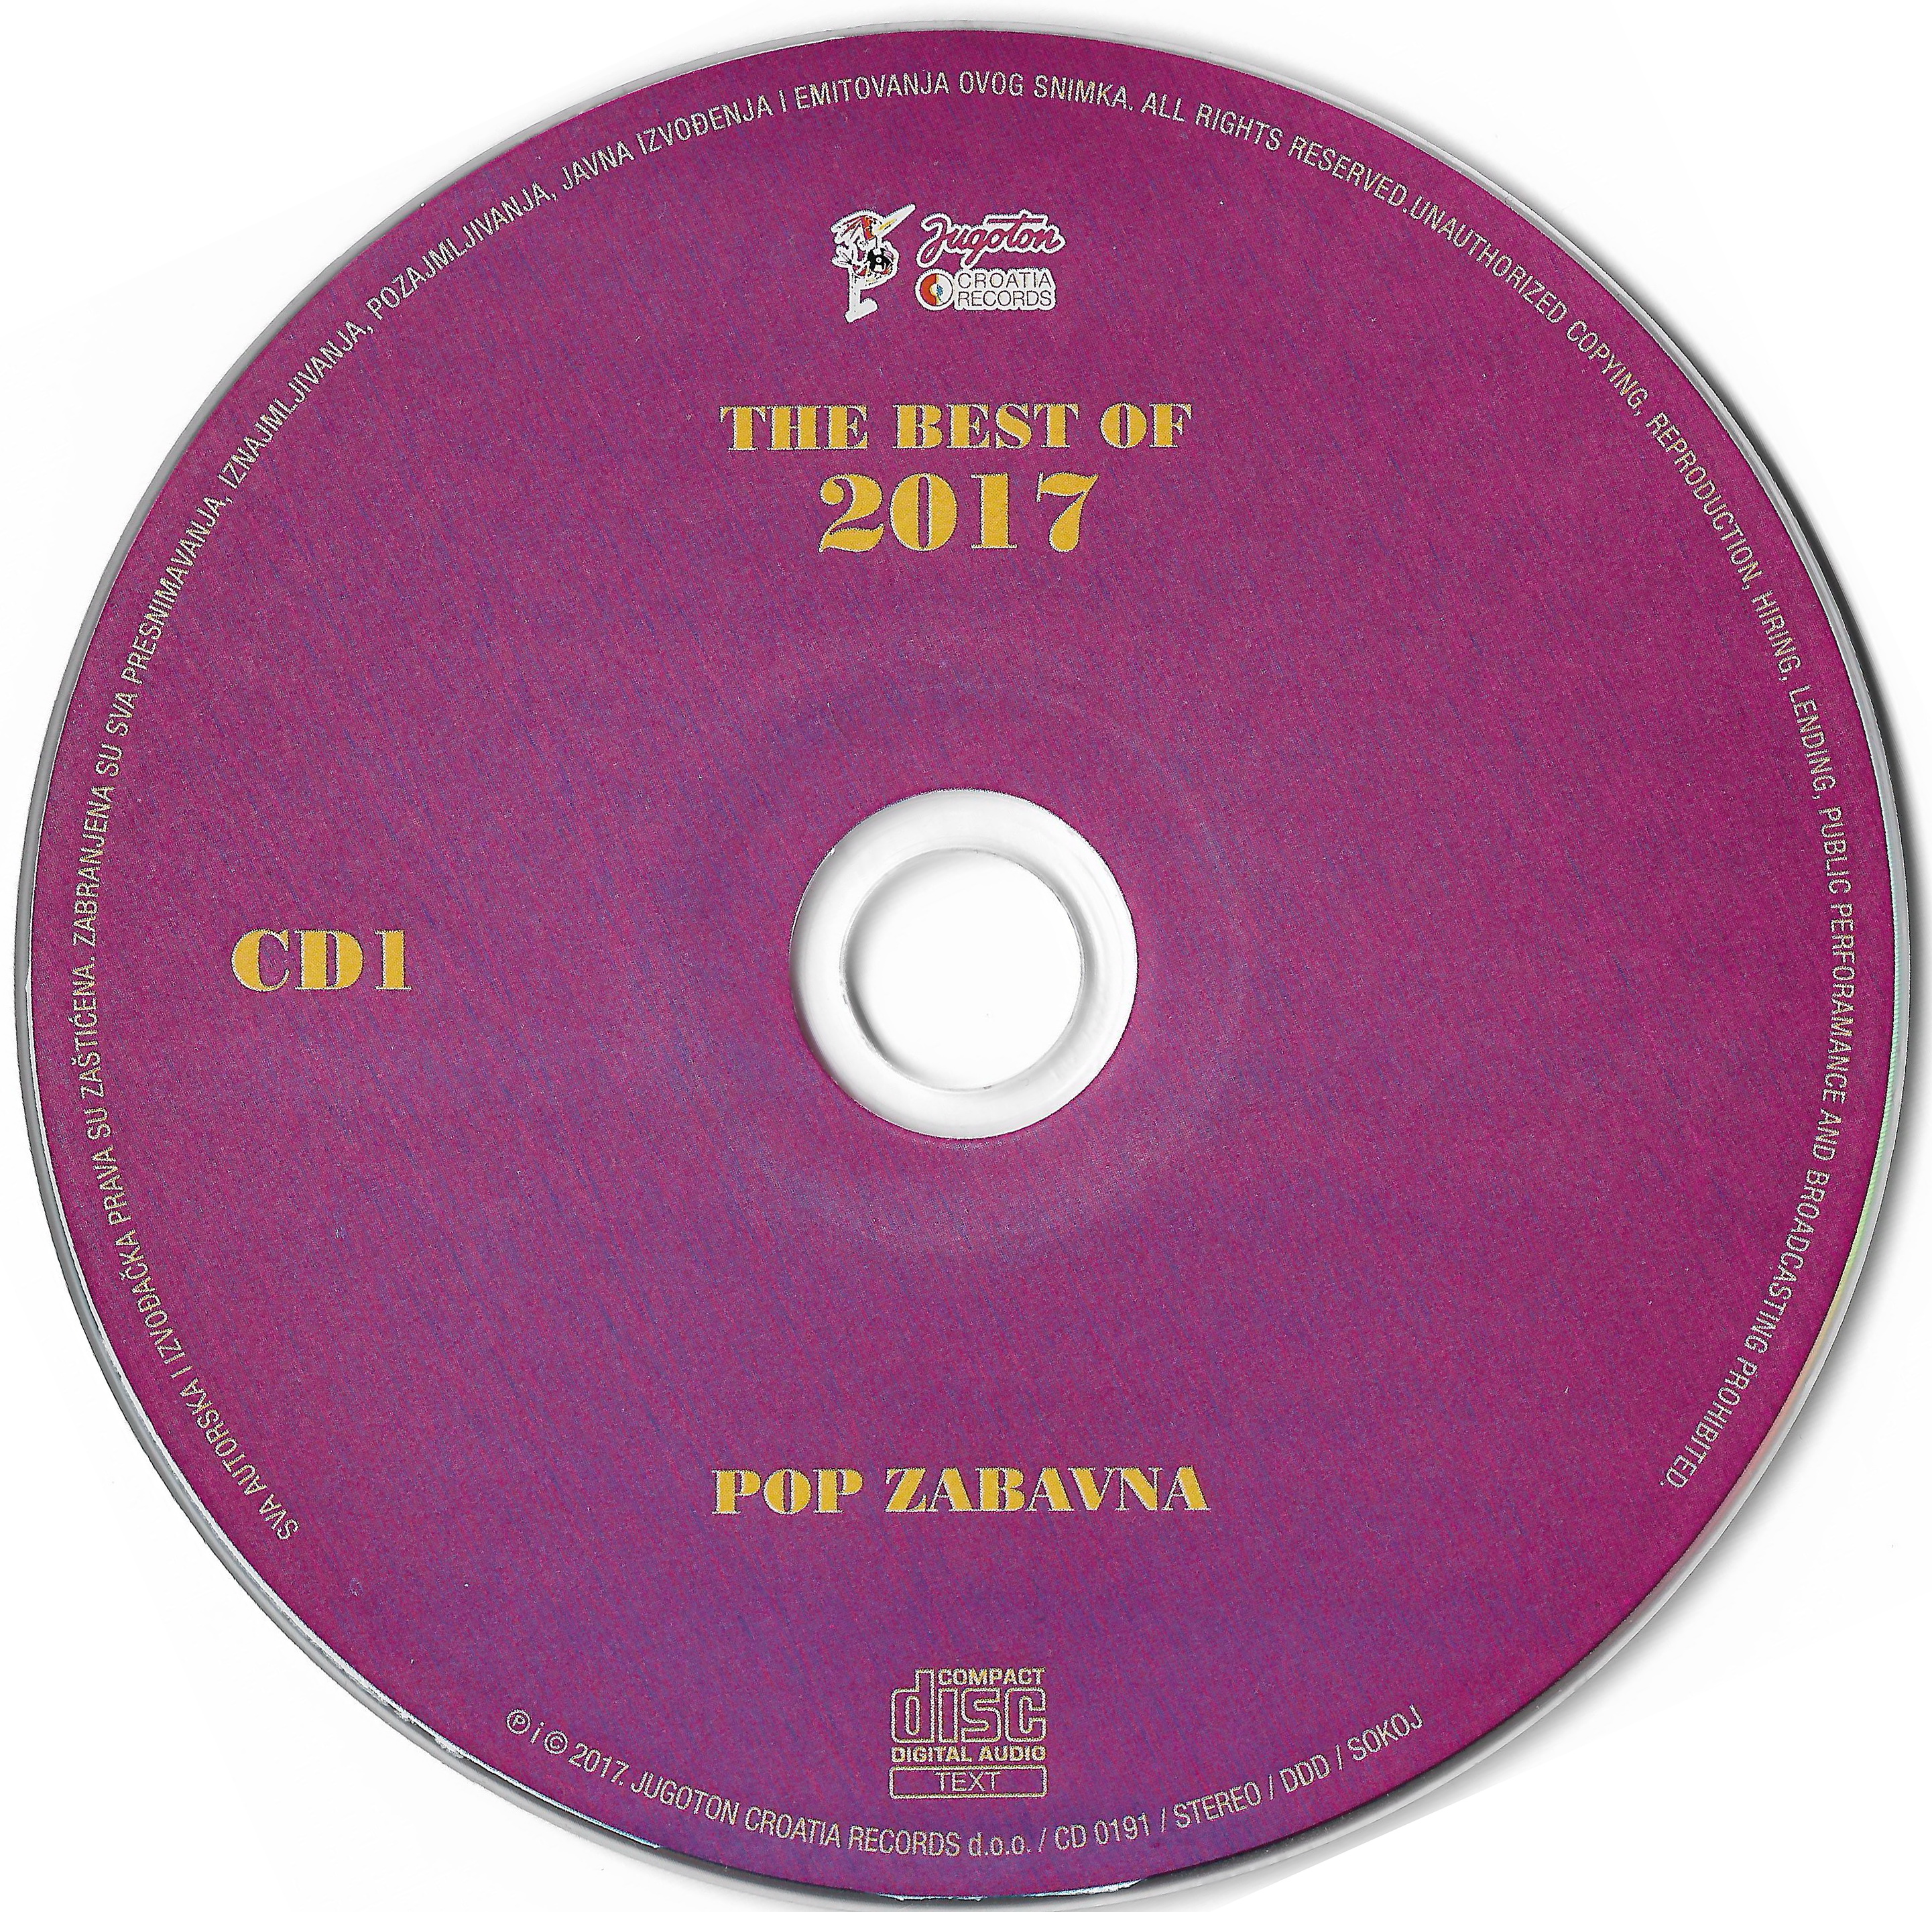 The Best Of 2017 CD 1